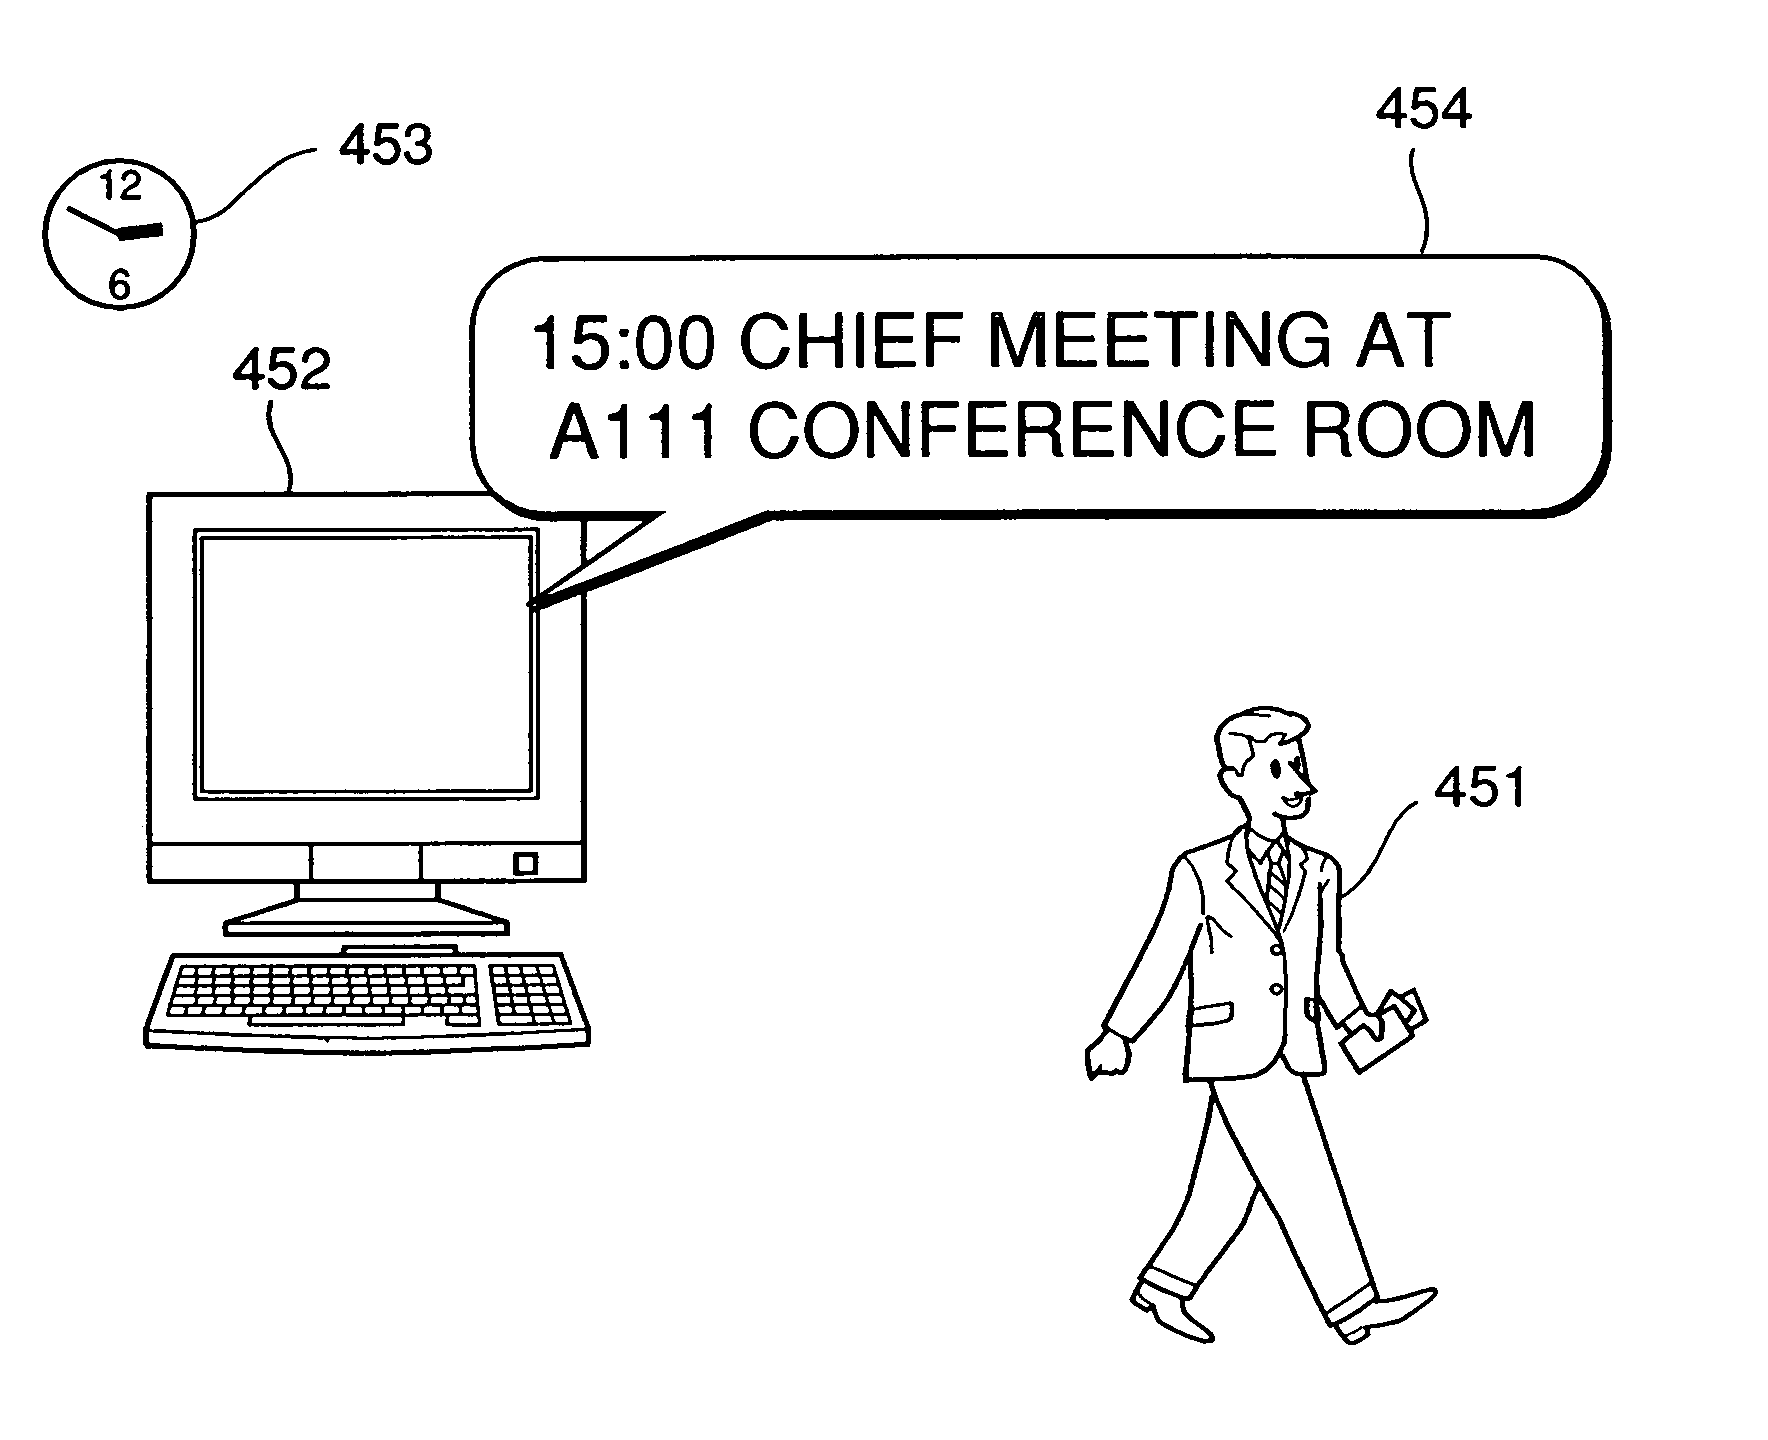 Notification apparatus and method therefor